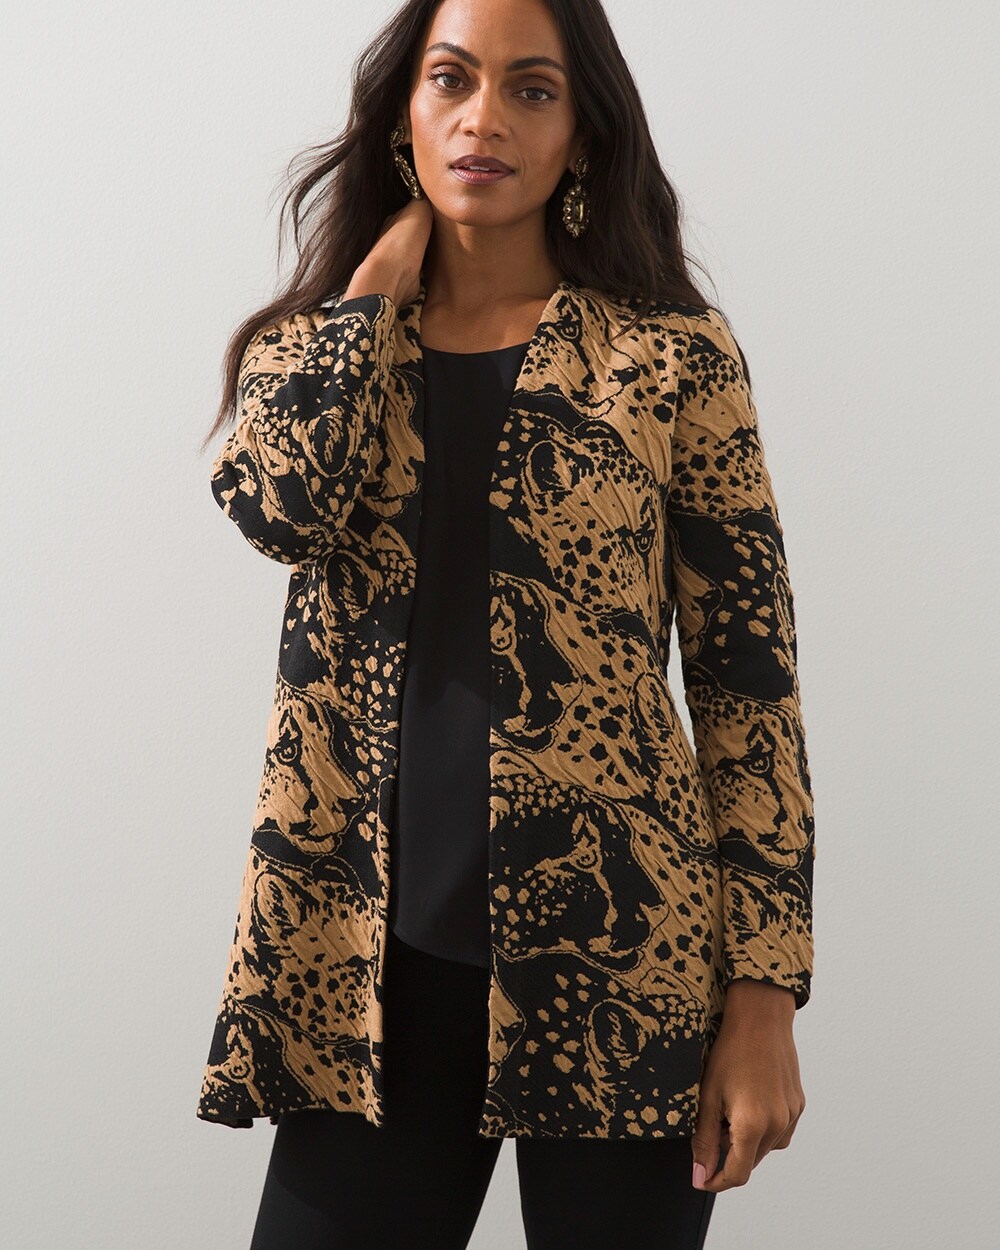 Animal Print Jacquard Cardigan video preview image, click to start video